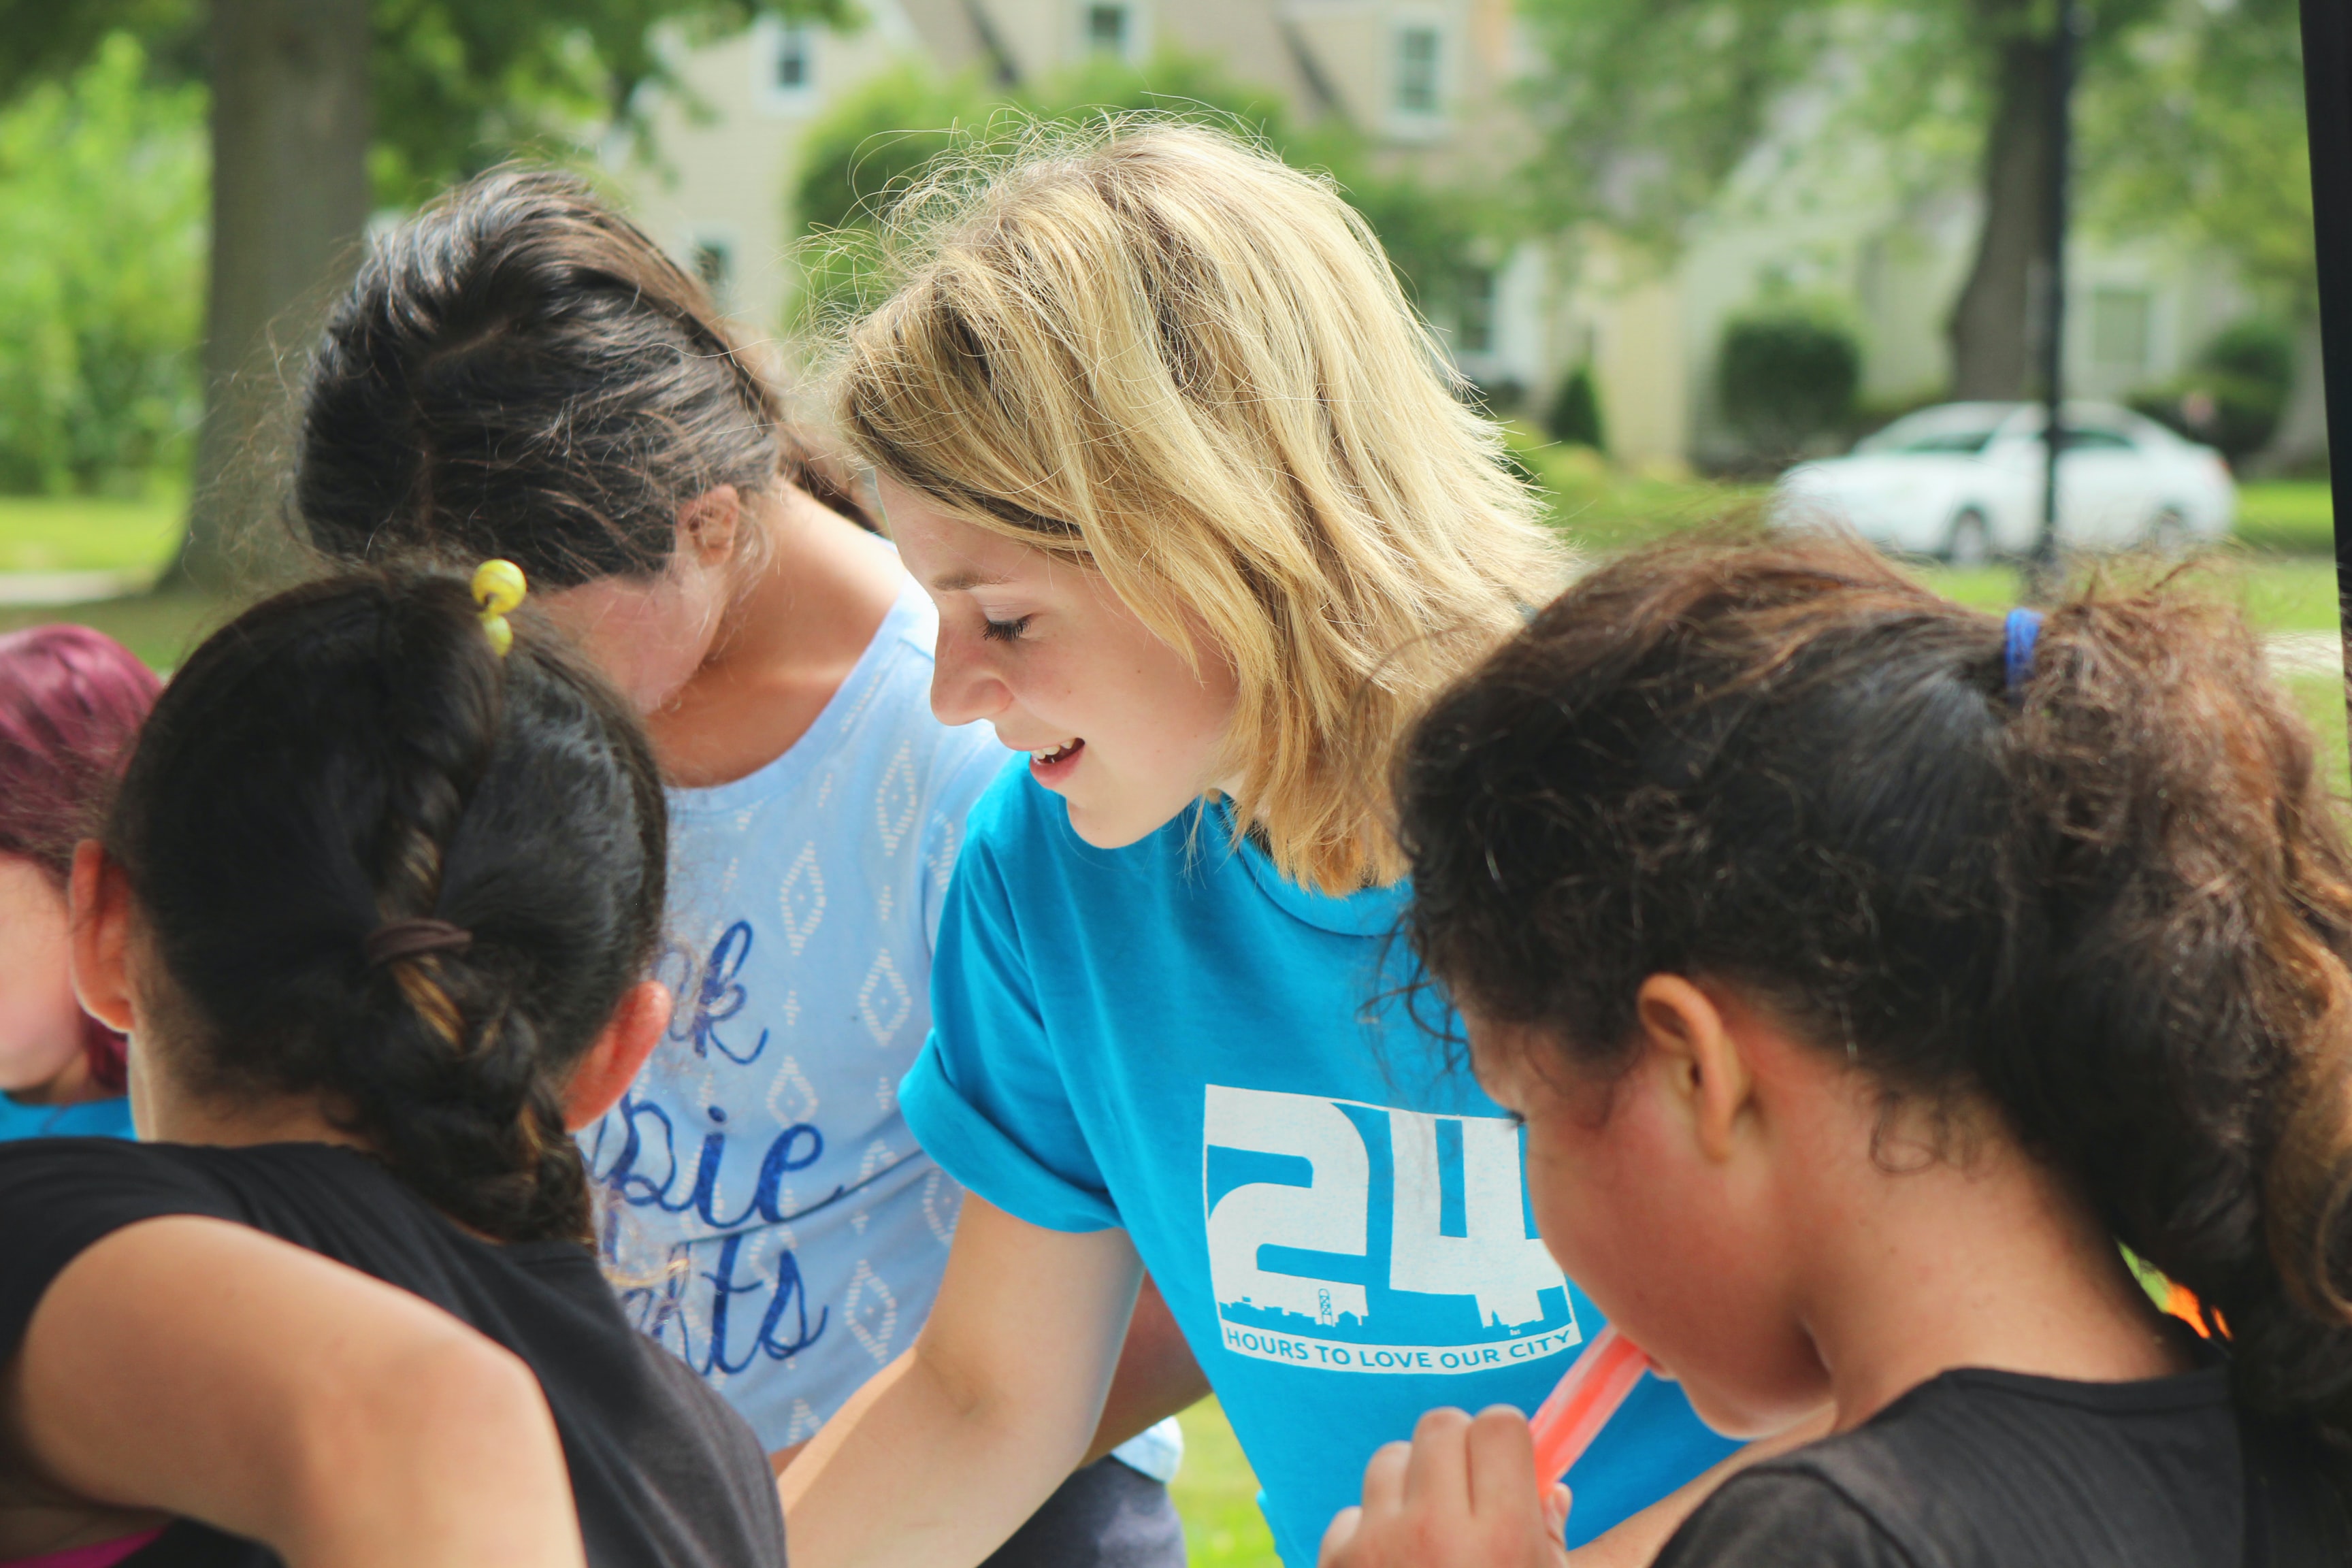 Young woman in a blue t-shirt with'24' on it. She is helping some children who are looking at something she is showing them.